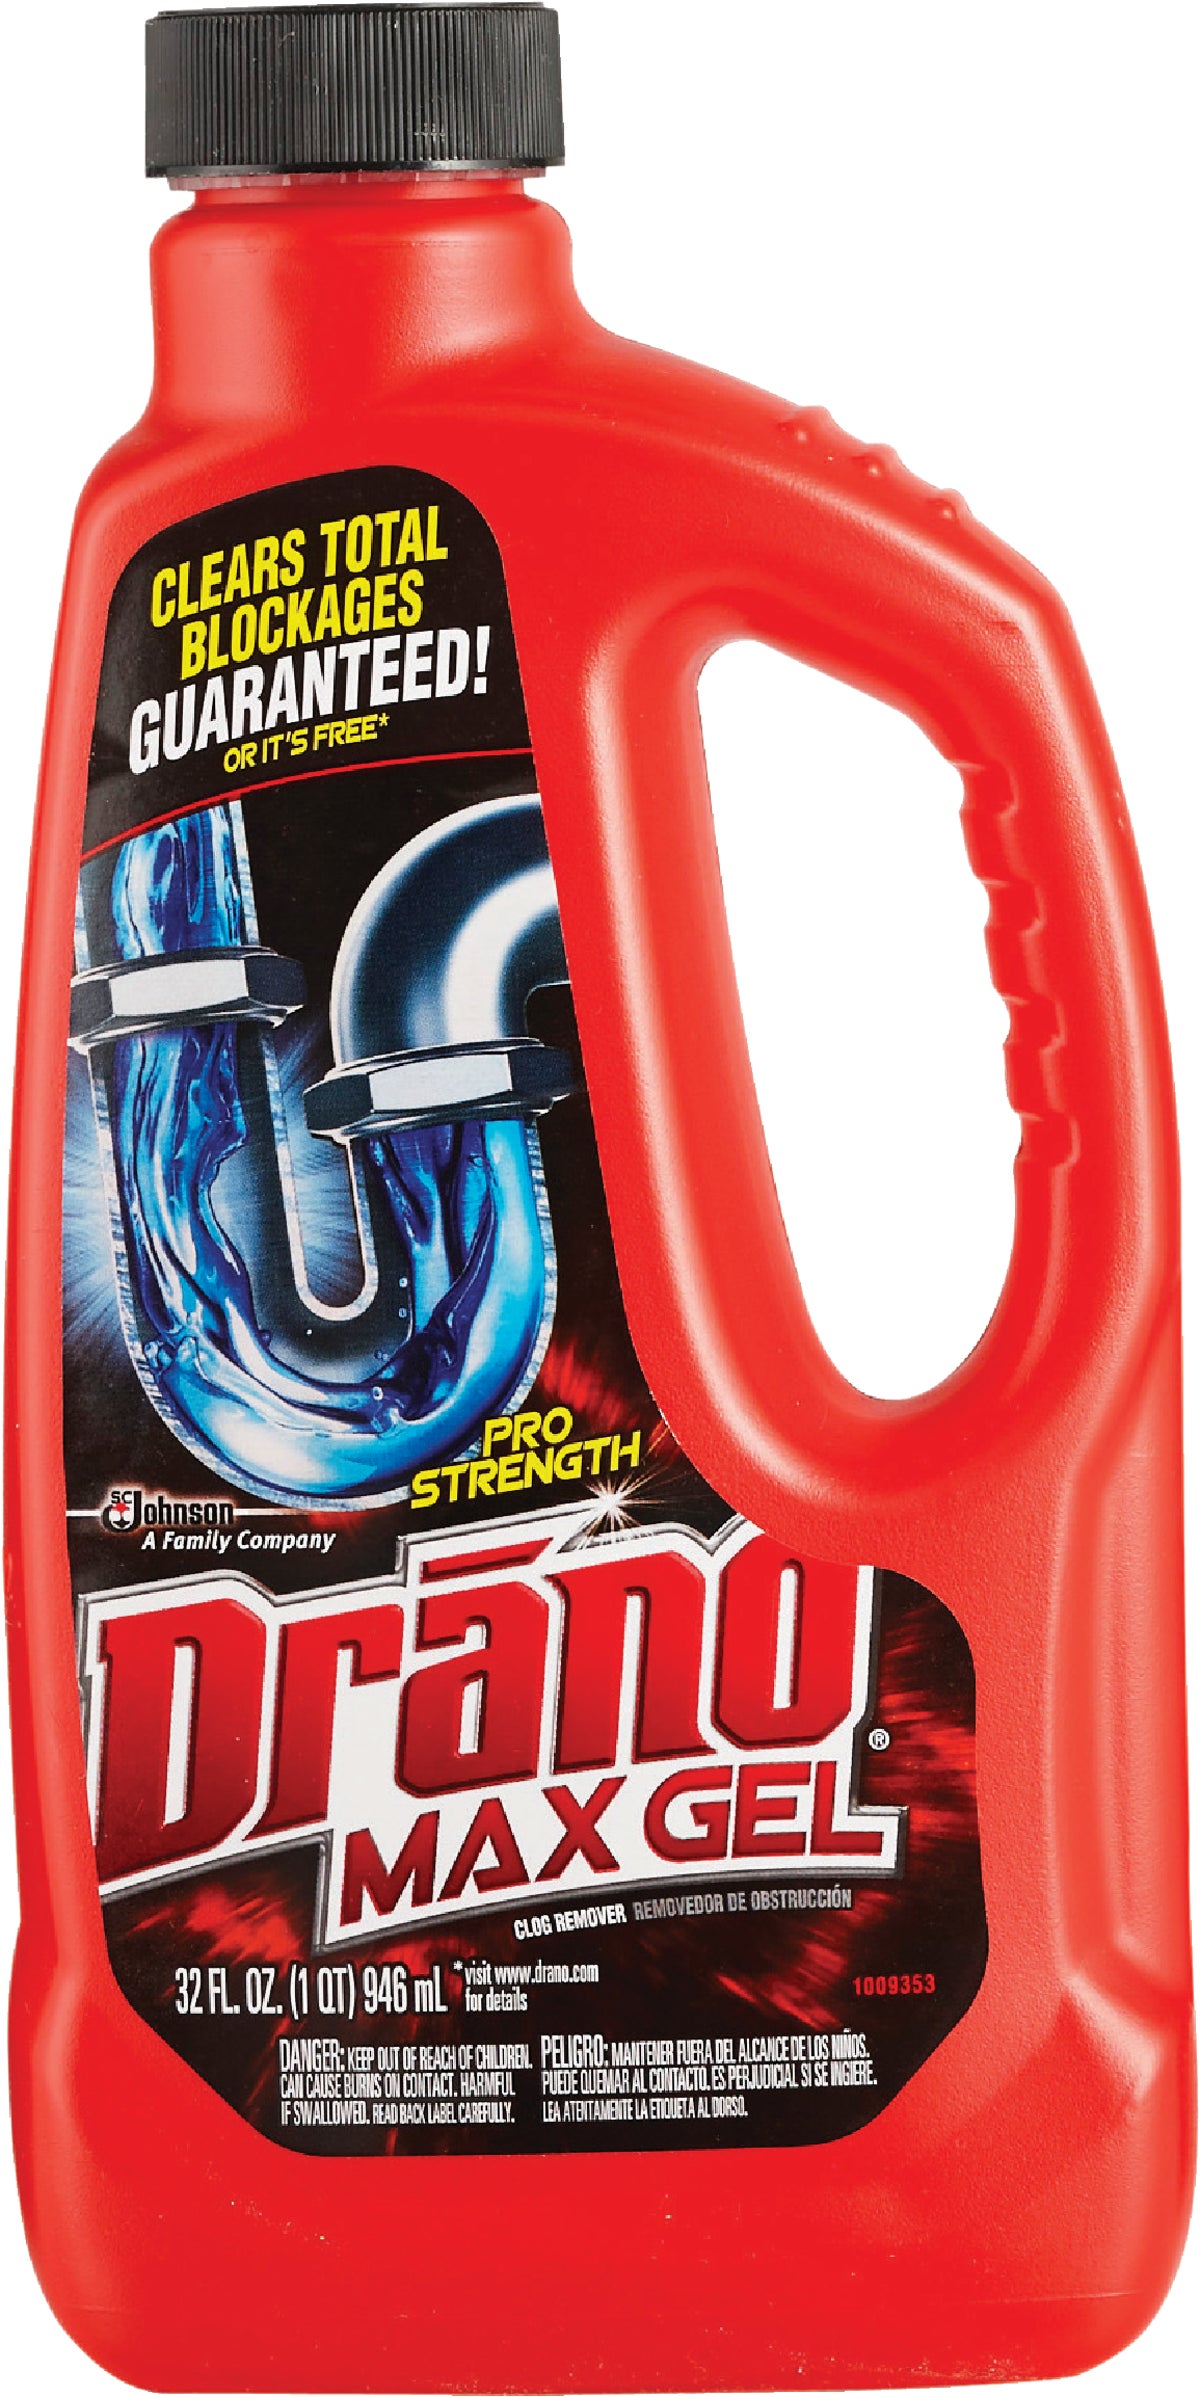 Drano Gel Household Cleaning Products for sale